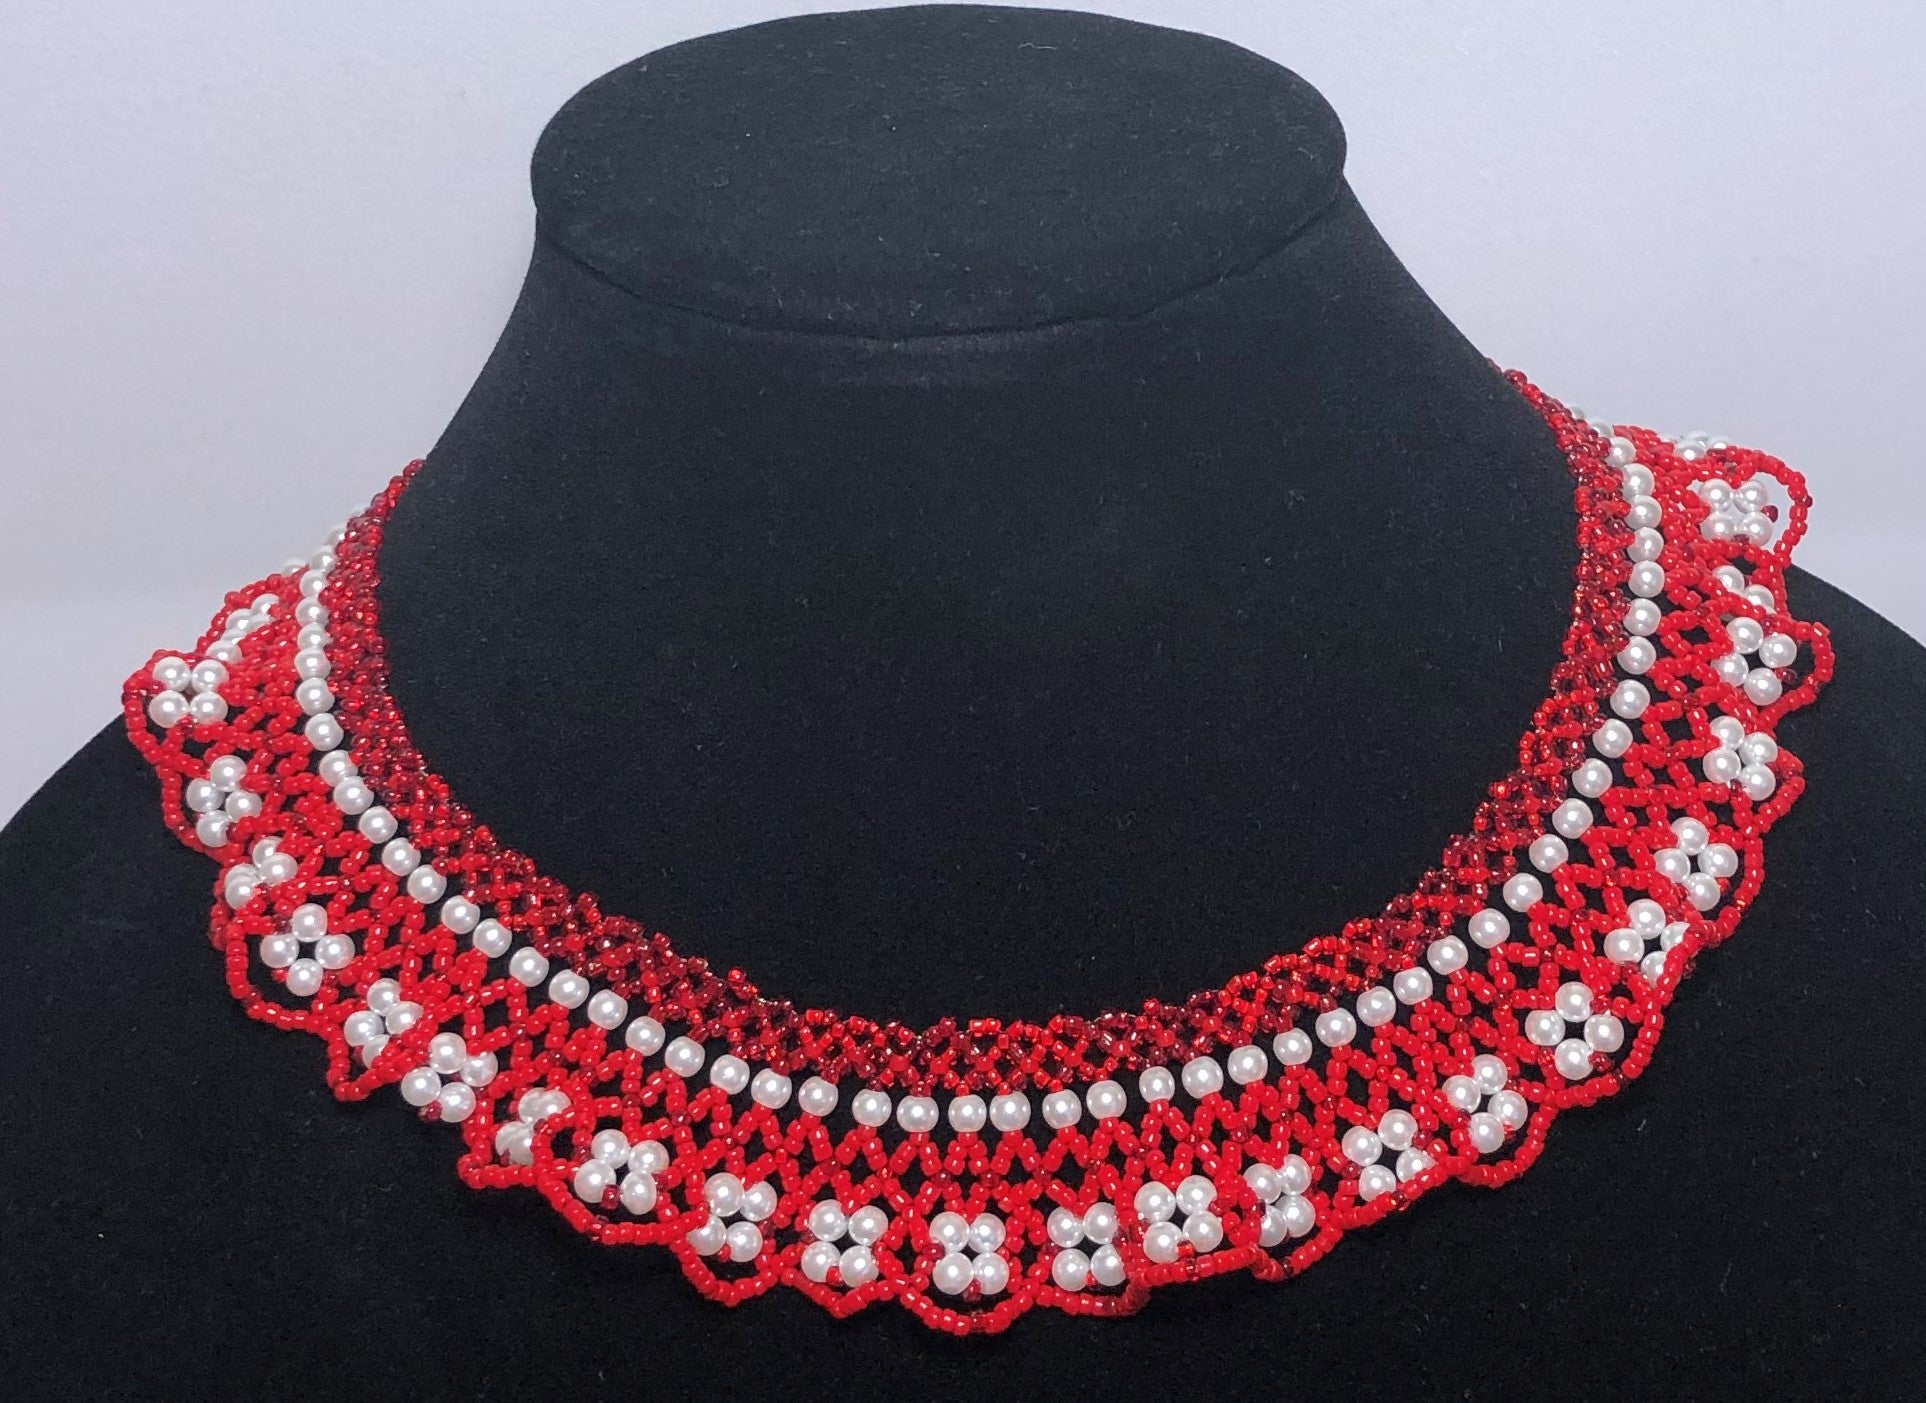 Red and White Ruffle Netted Necklace